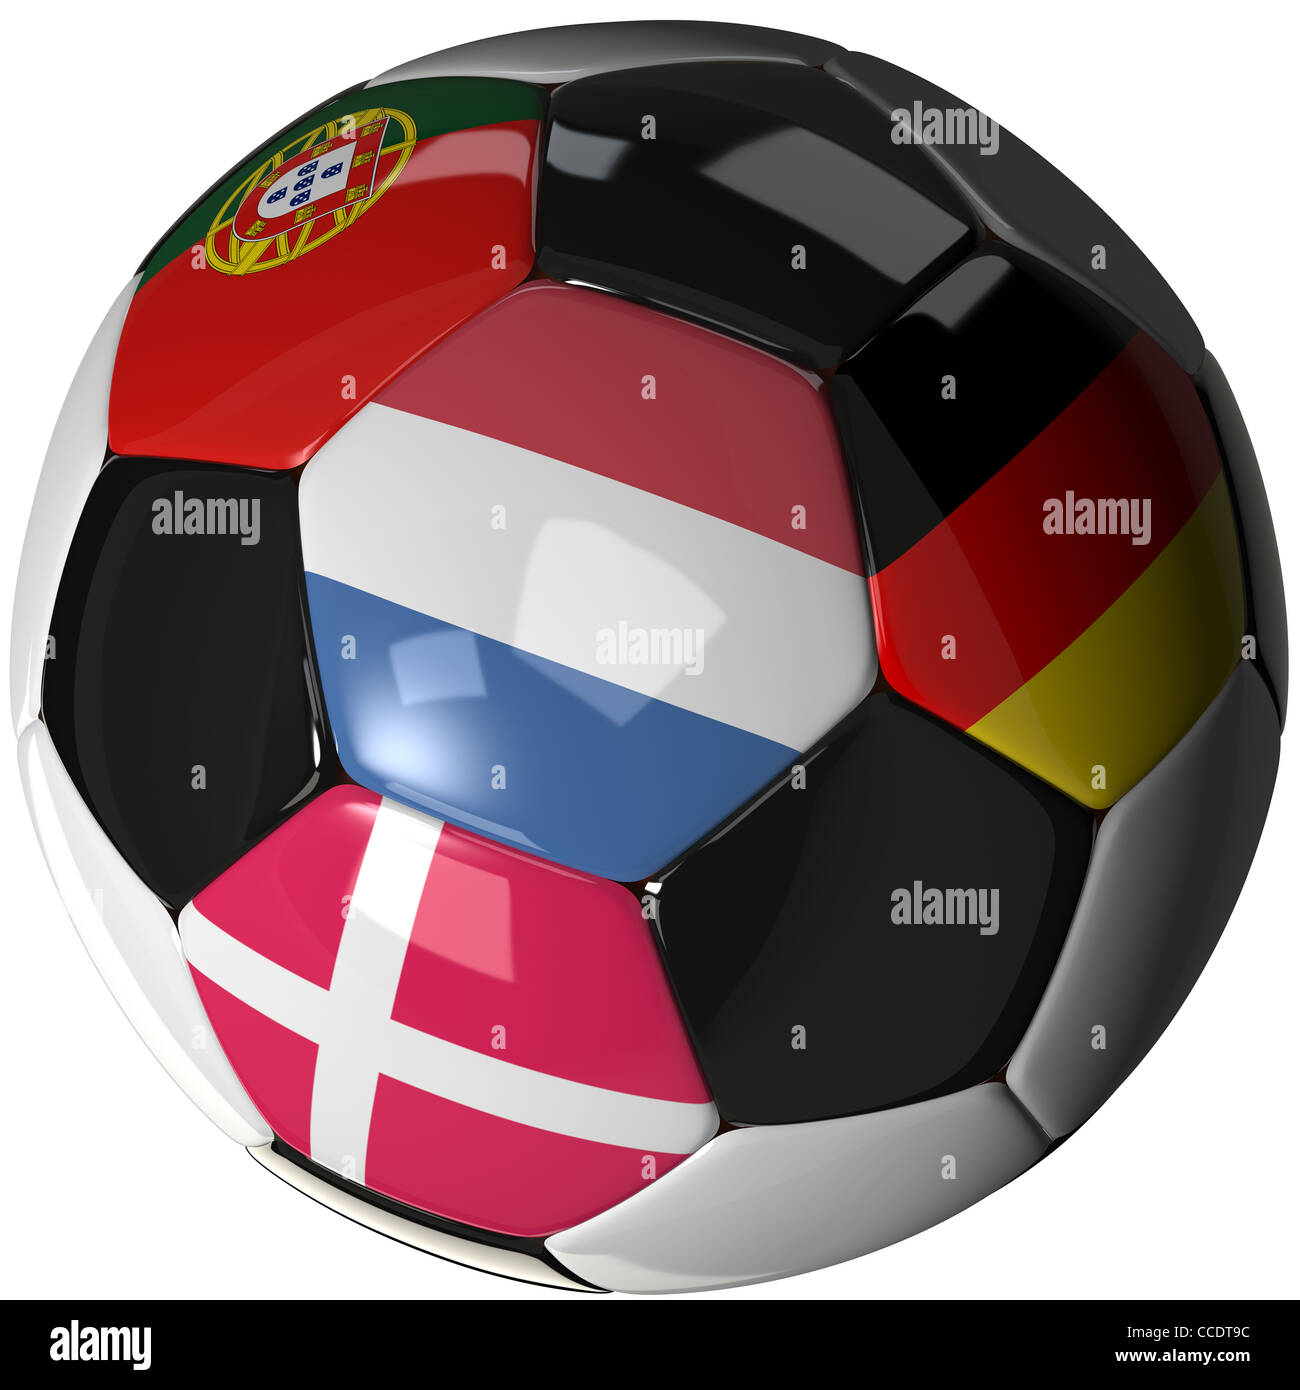 Soccer ball with the four flags of the competing teams in group B of the 2012 European Soccer Championship. Stock Photo